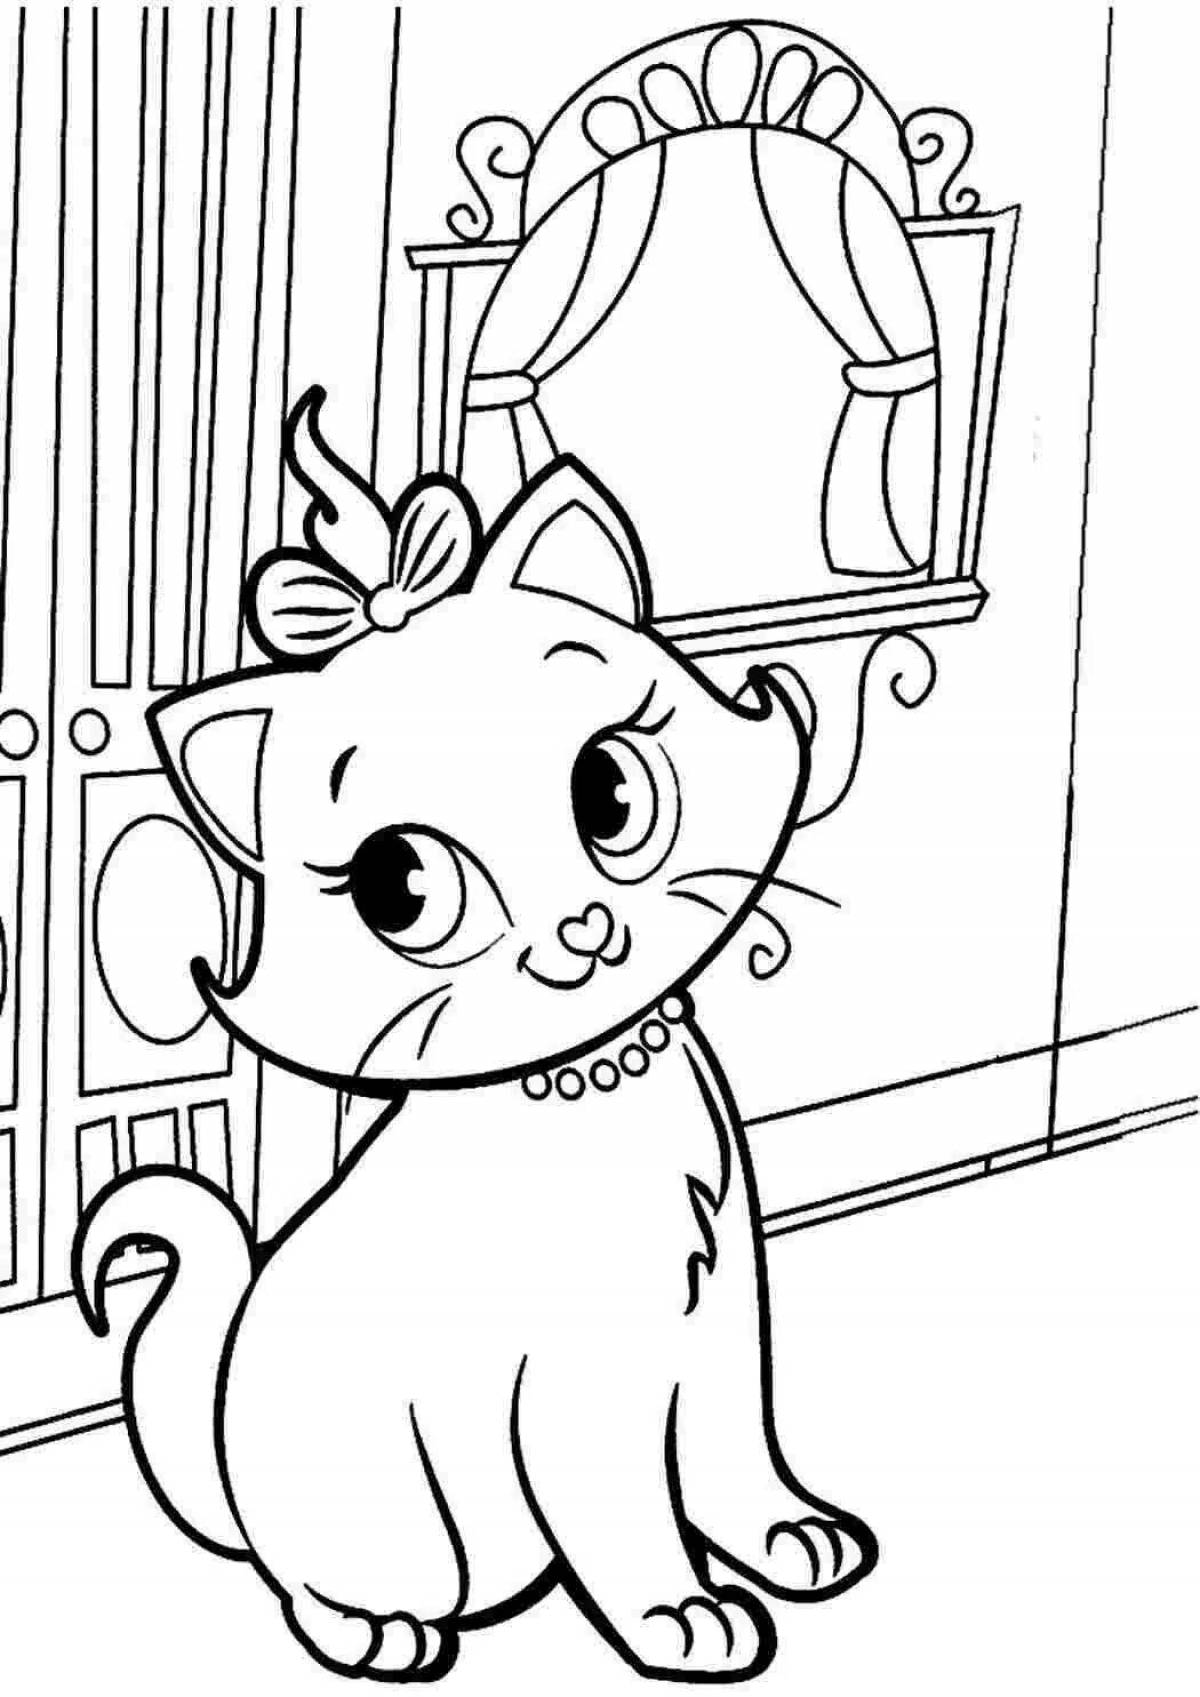 Exquisite kitty coloring book for 6-7 year olds